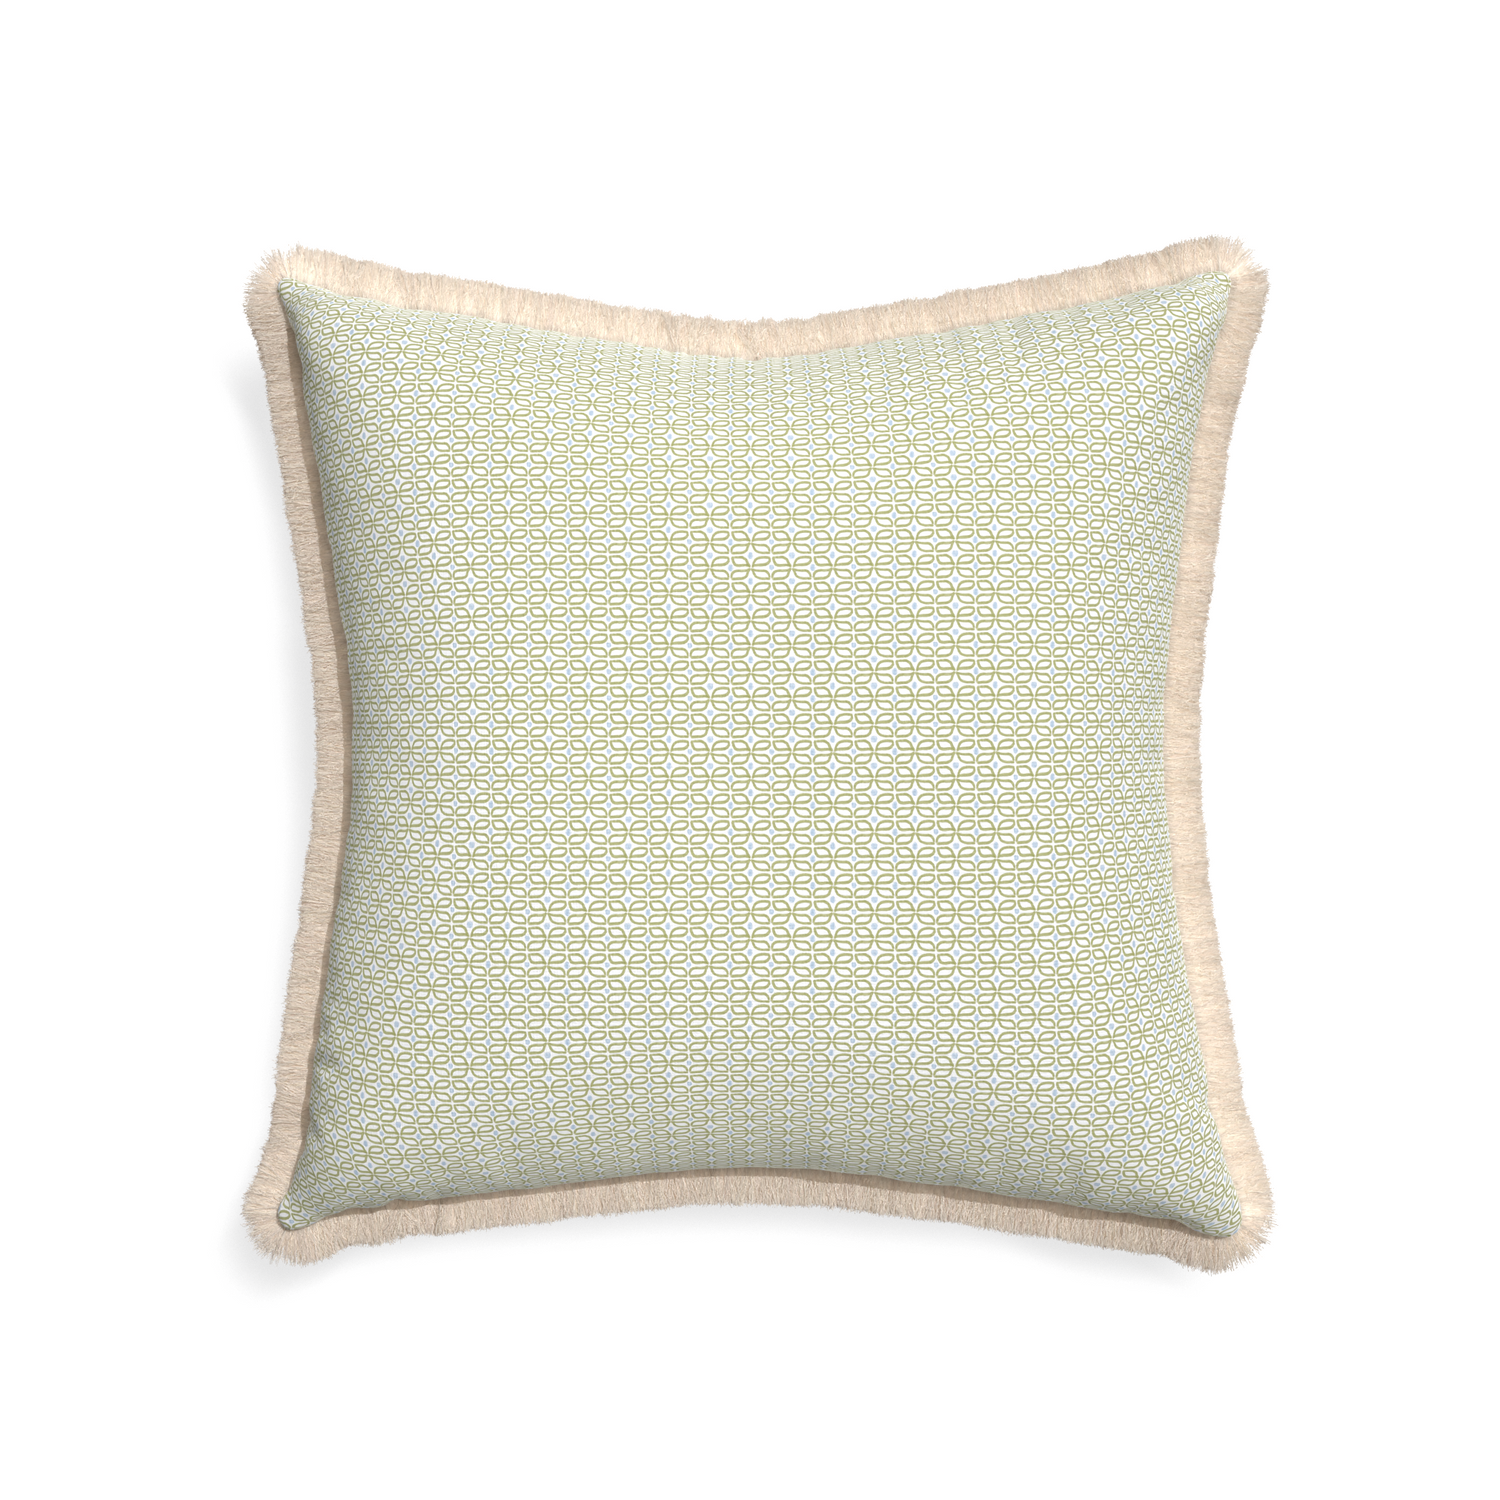 22-square loomi moss custom pillow with cream fringe on white background